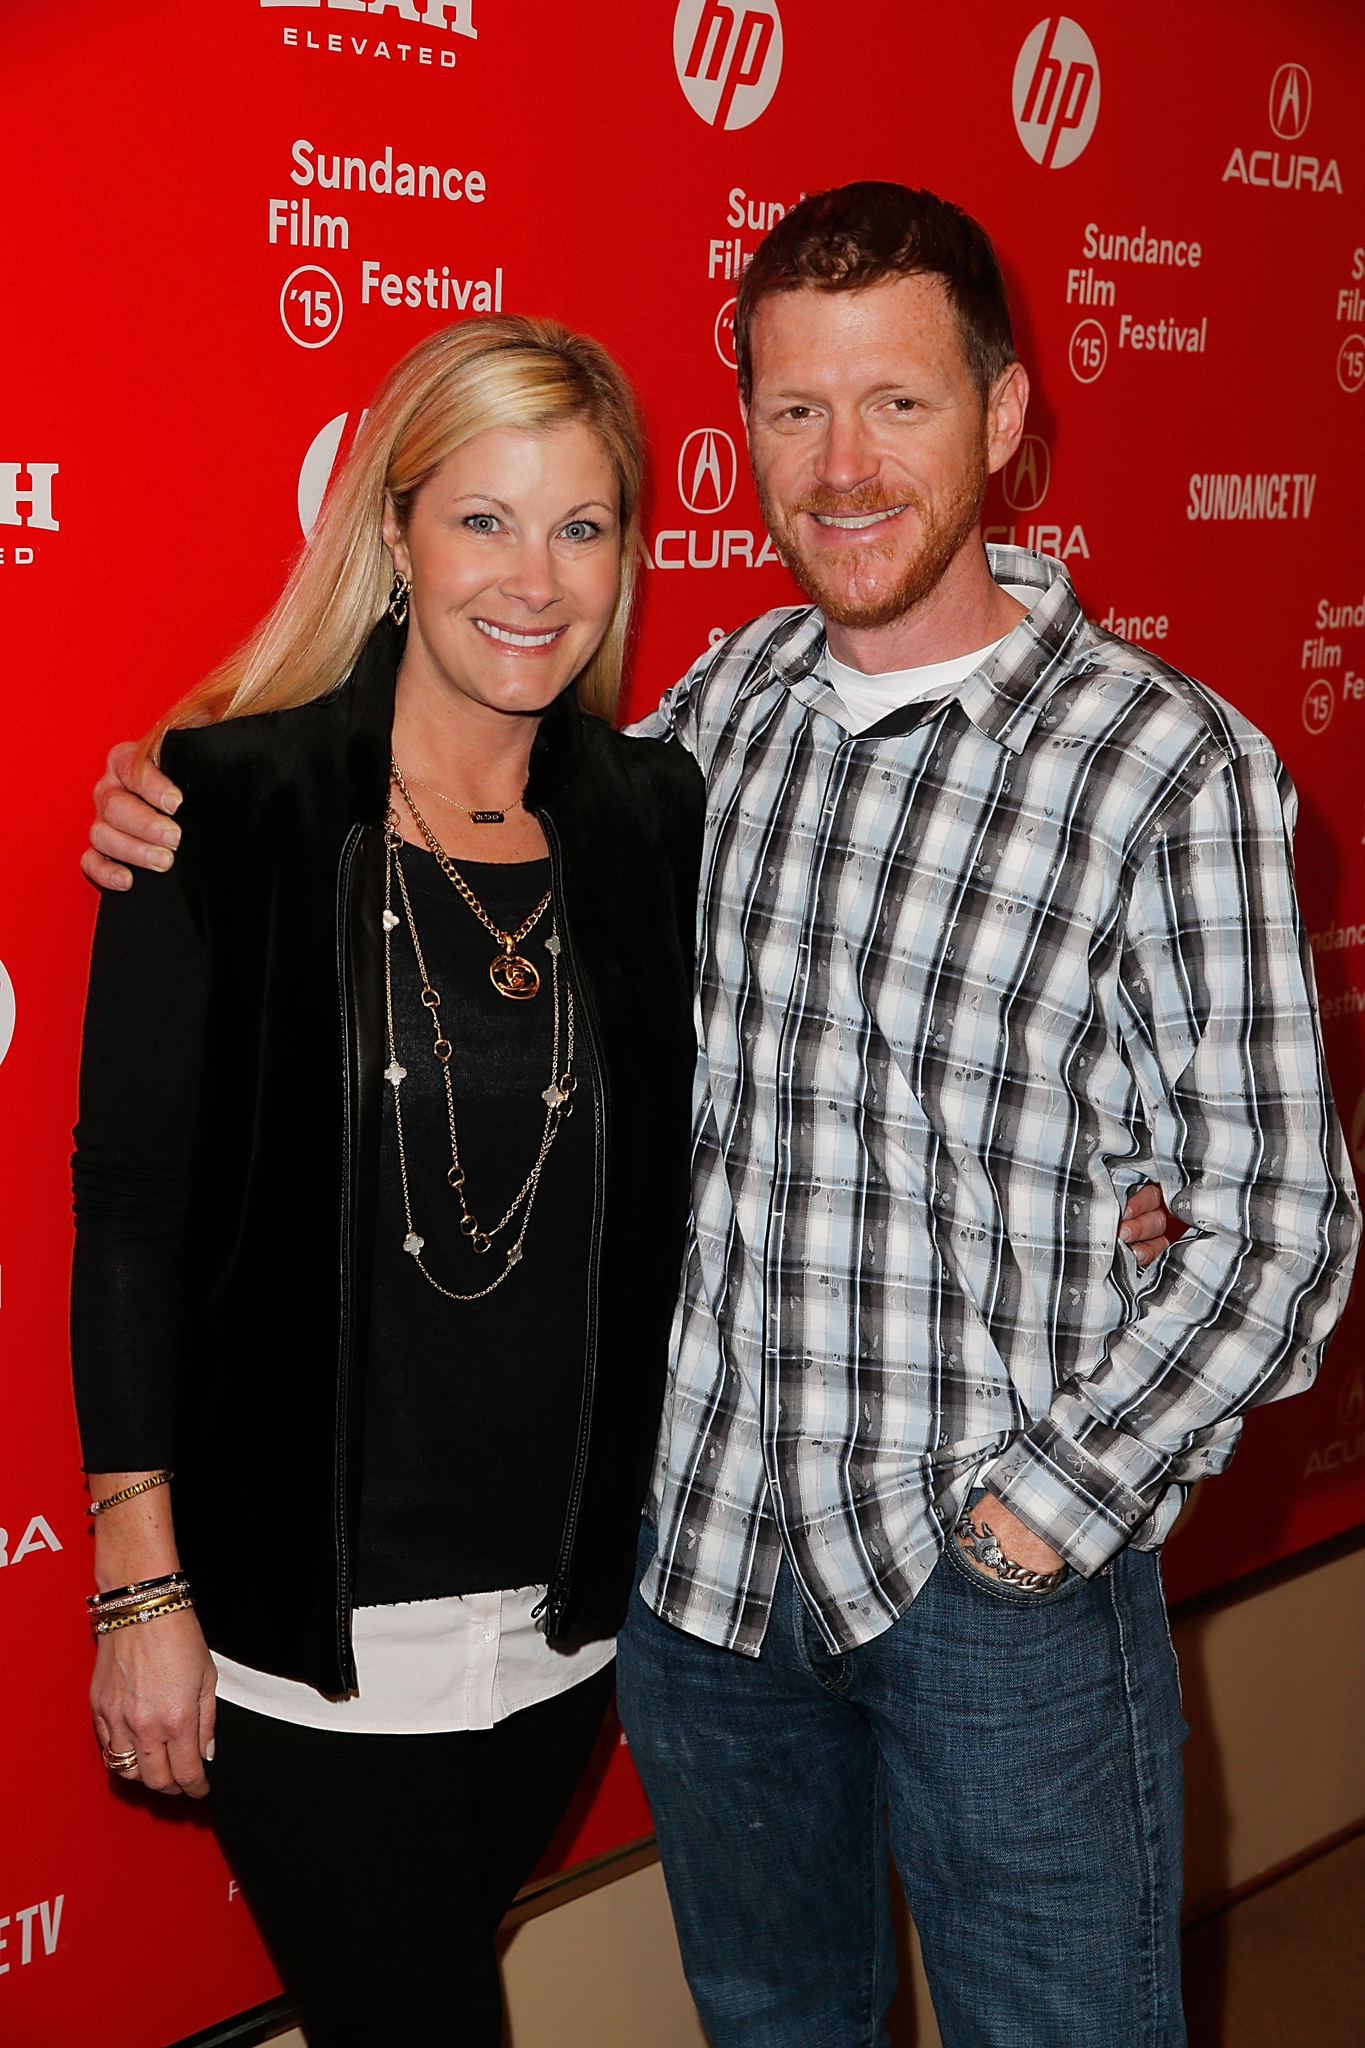 Burton Ritchie and Becky Newhall at event of Misery Loves Comedy (2015)